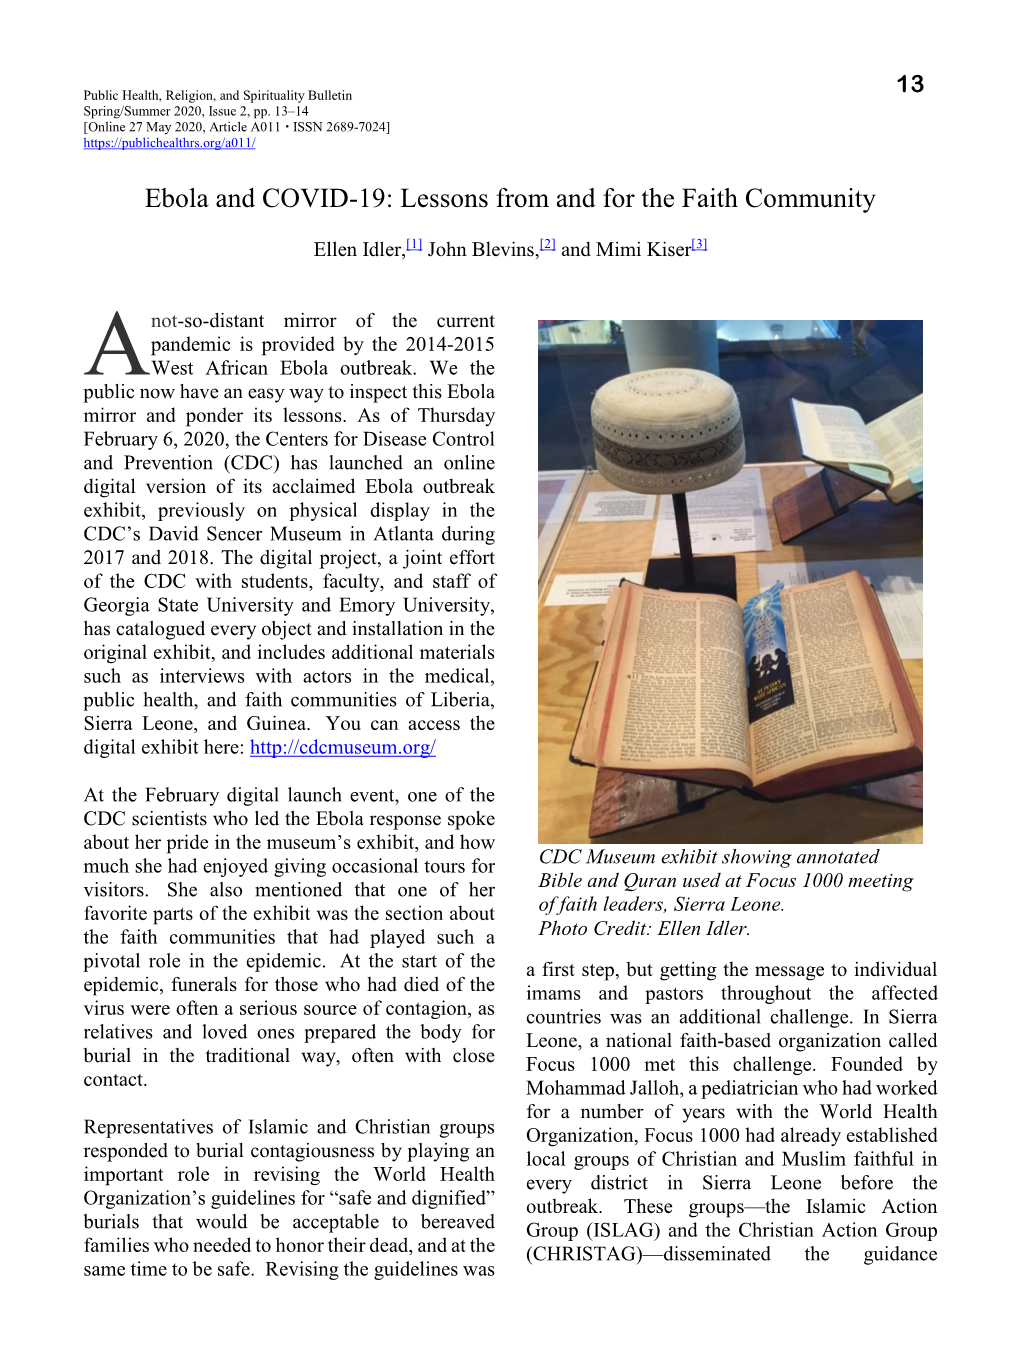 Ebola and COVID-19: Lessons from and for the Faith Community